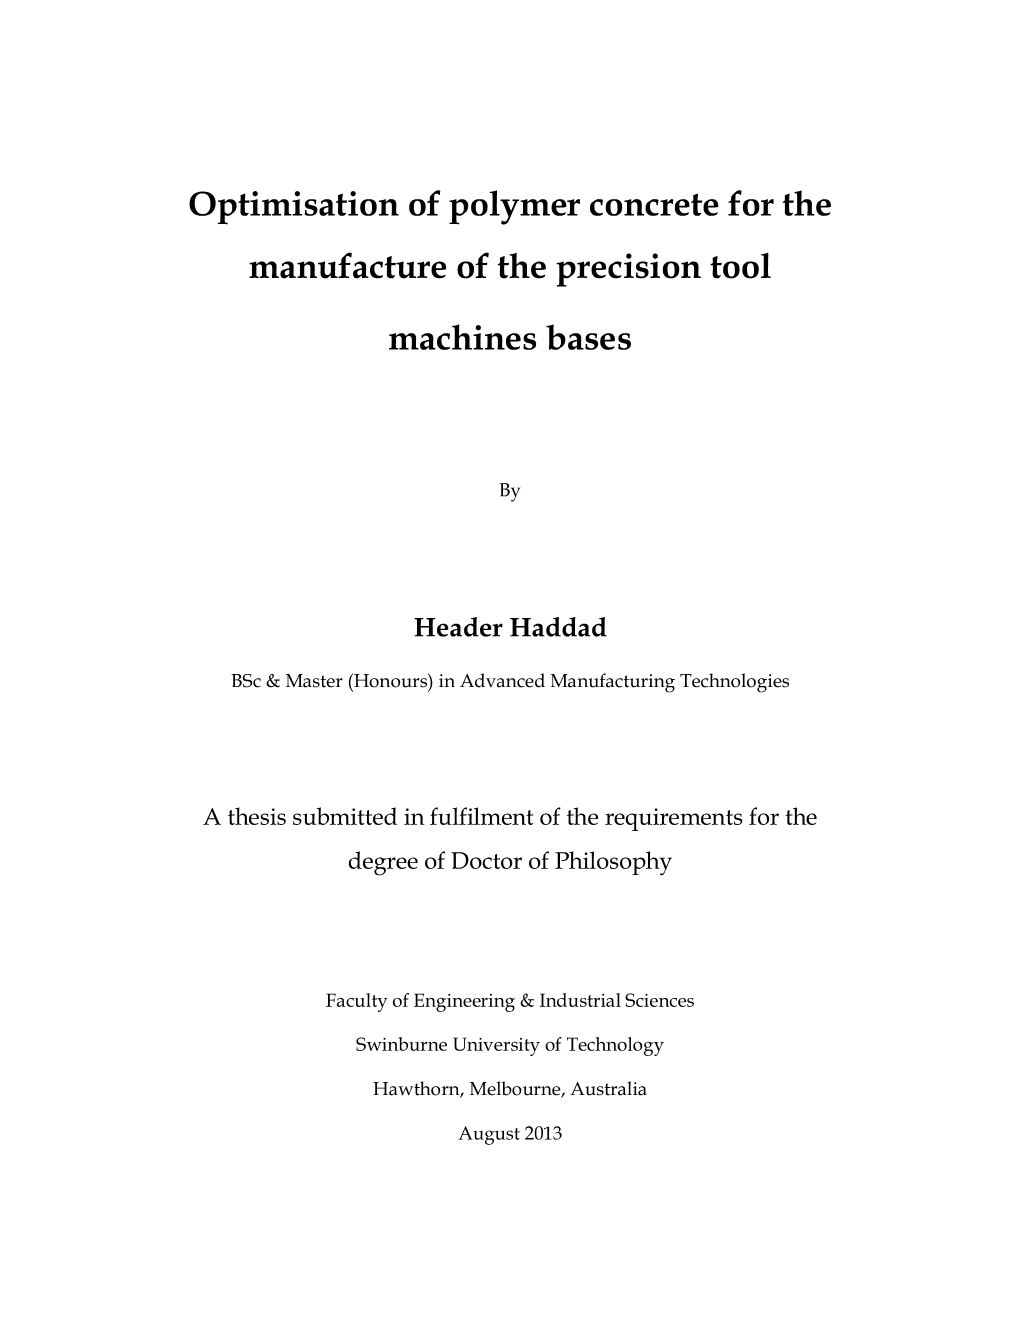 Optimisation of Polymer Concrete for the Manufacture of the Precision Tool